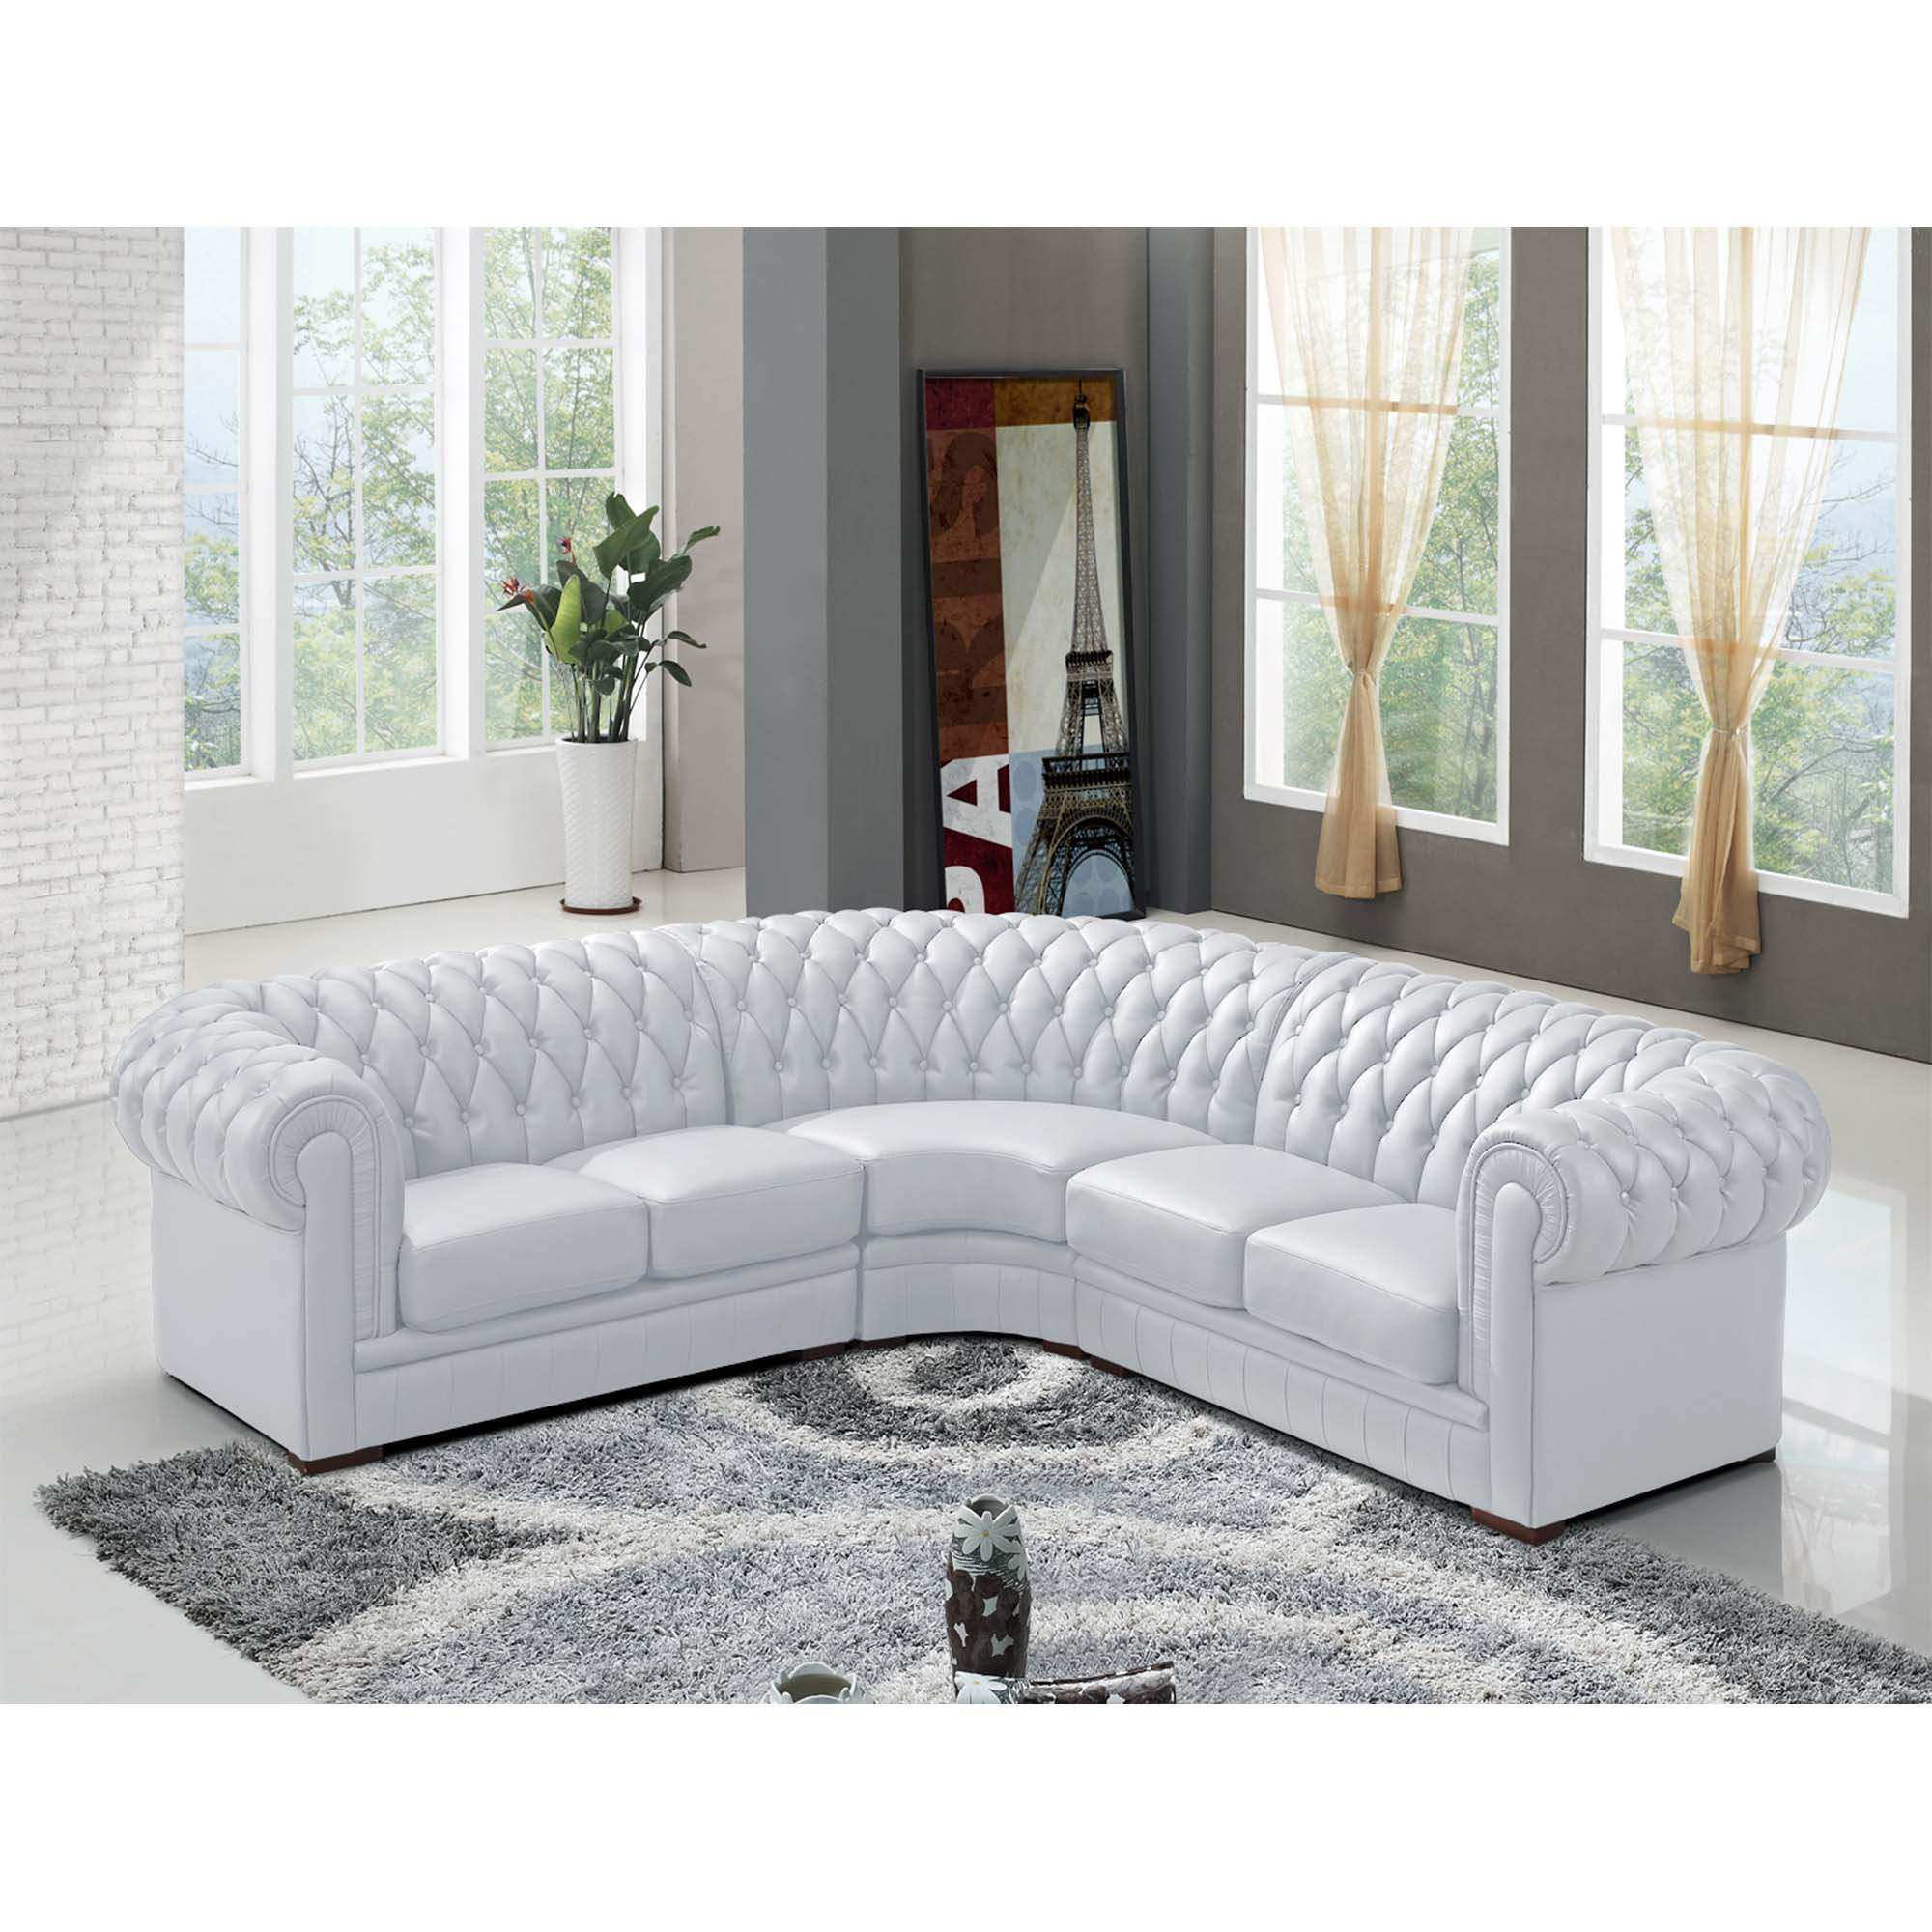 8_Canape D Angle Reversible Cuir Blanc Capitonne Chesterfield serapportantà Canape Angle Cuir